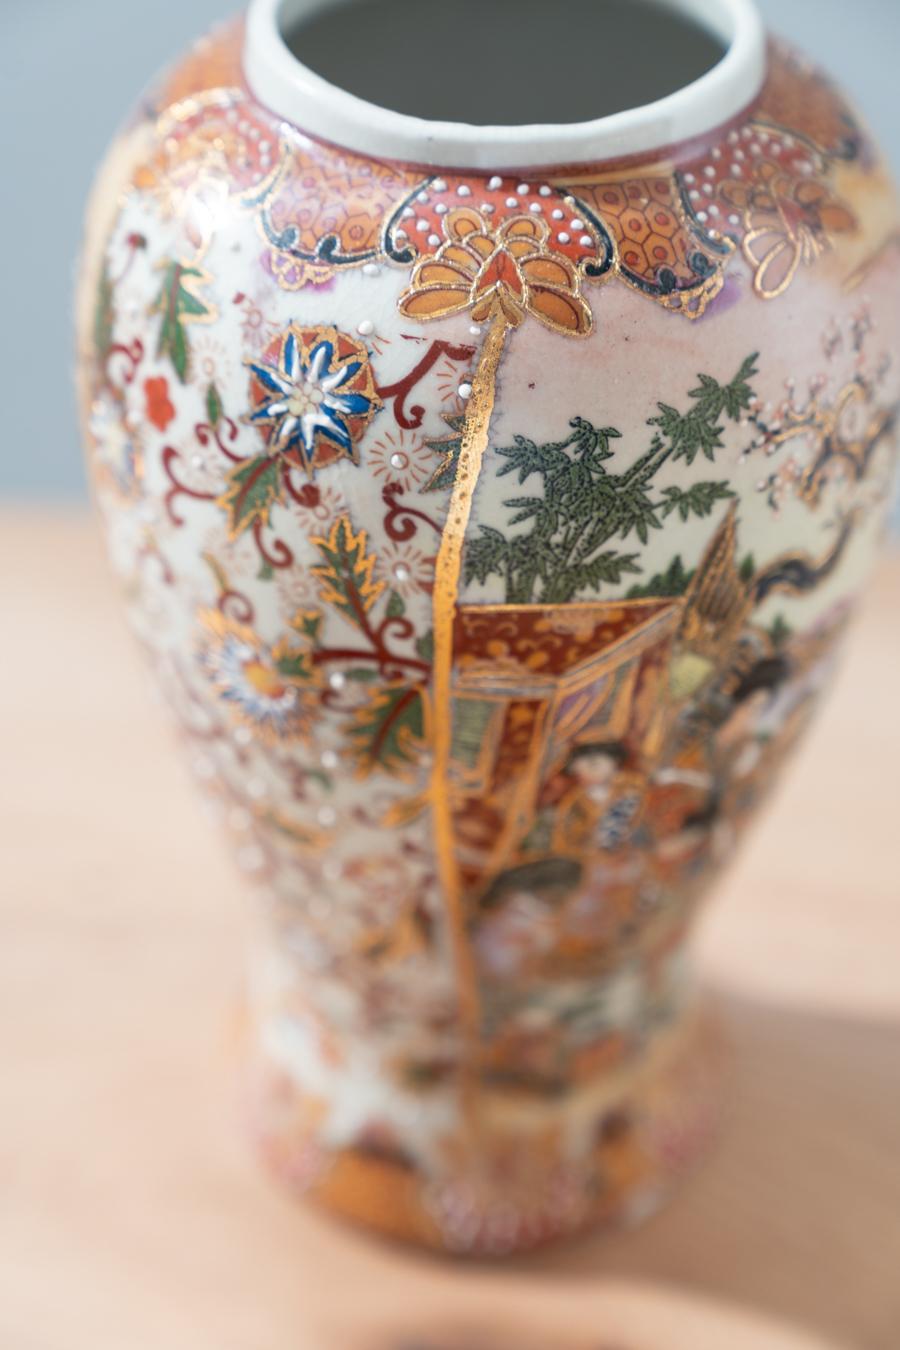 Hand-decorated Chinese Royal Satsuma ceramic vases, 1960s
Stile Vintage
Periodo del design 1960 - 1969
Production period Unknown, 1960 - 1969
Year of manufacture 1960
Country of production China
Royal Satsuma Creator
Manufacturer Royal